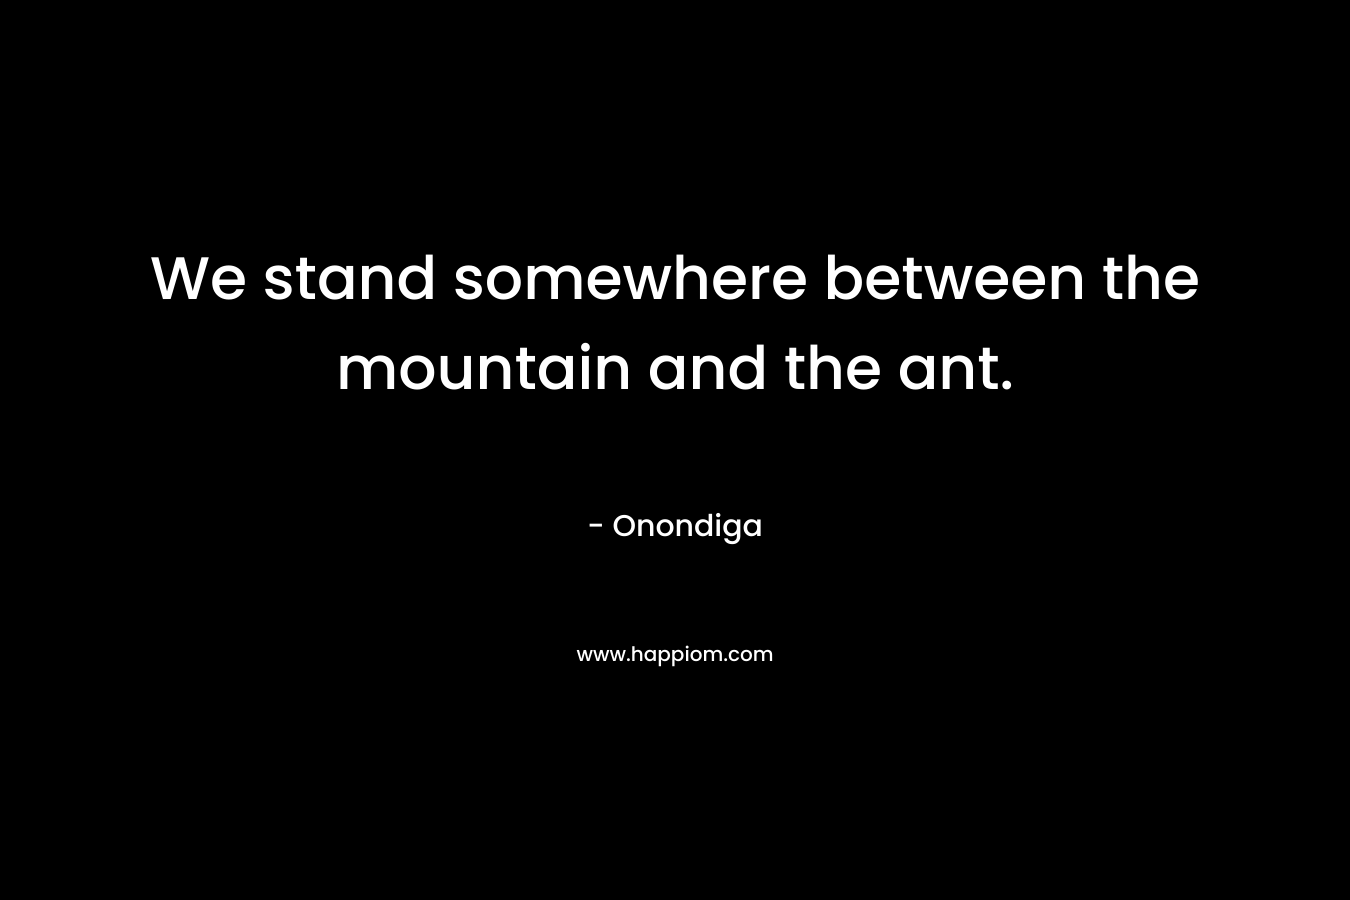 We stand somewhere between the mountain and the ant. – Onondiga